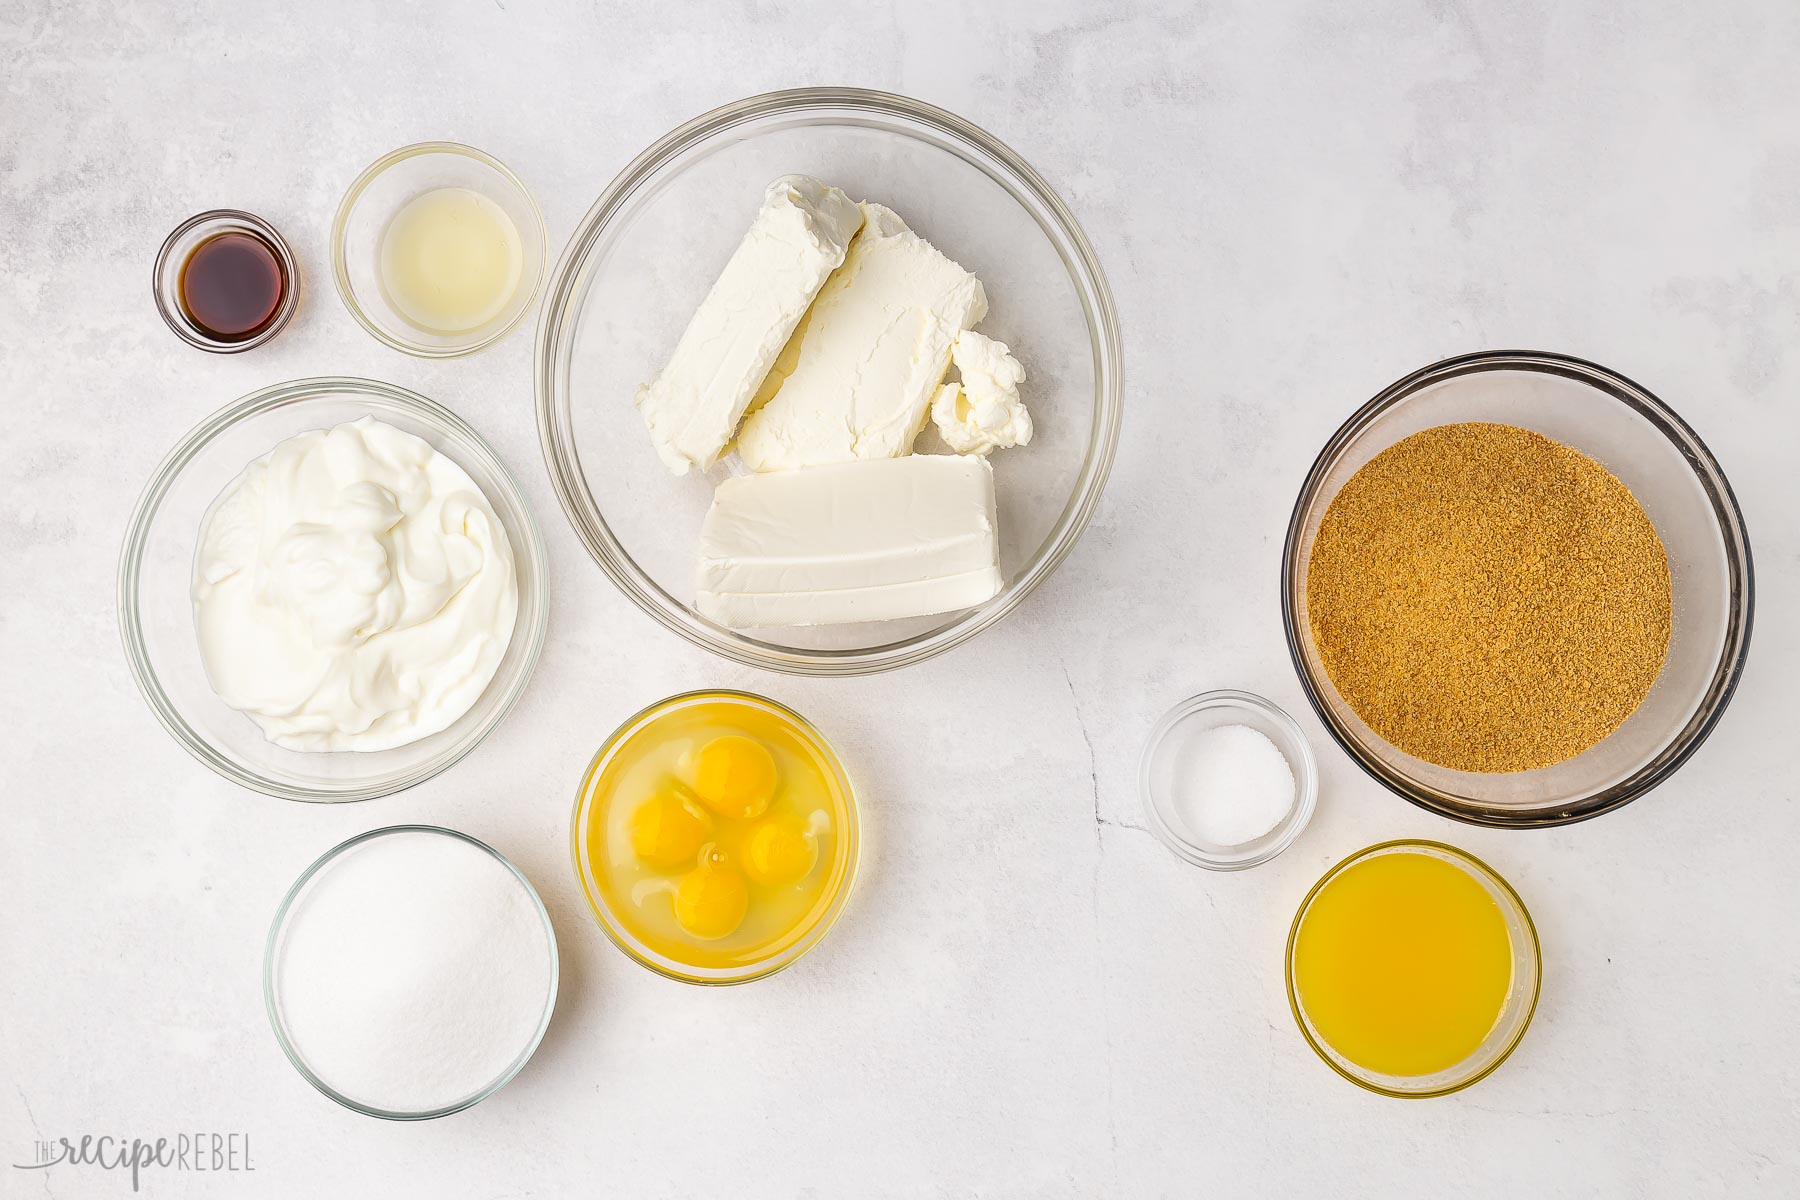 ingredients needed for baked cheesecake on white background.